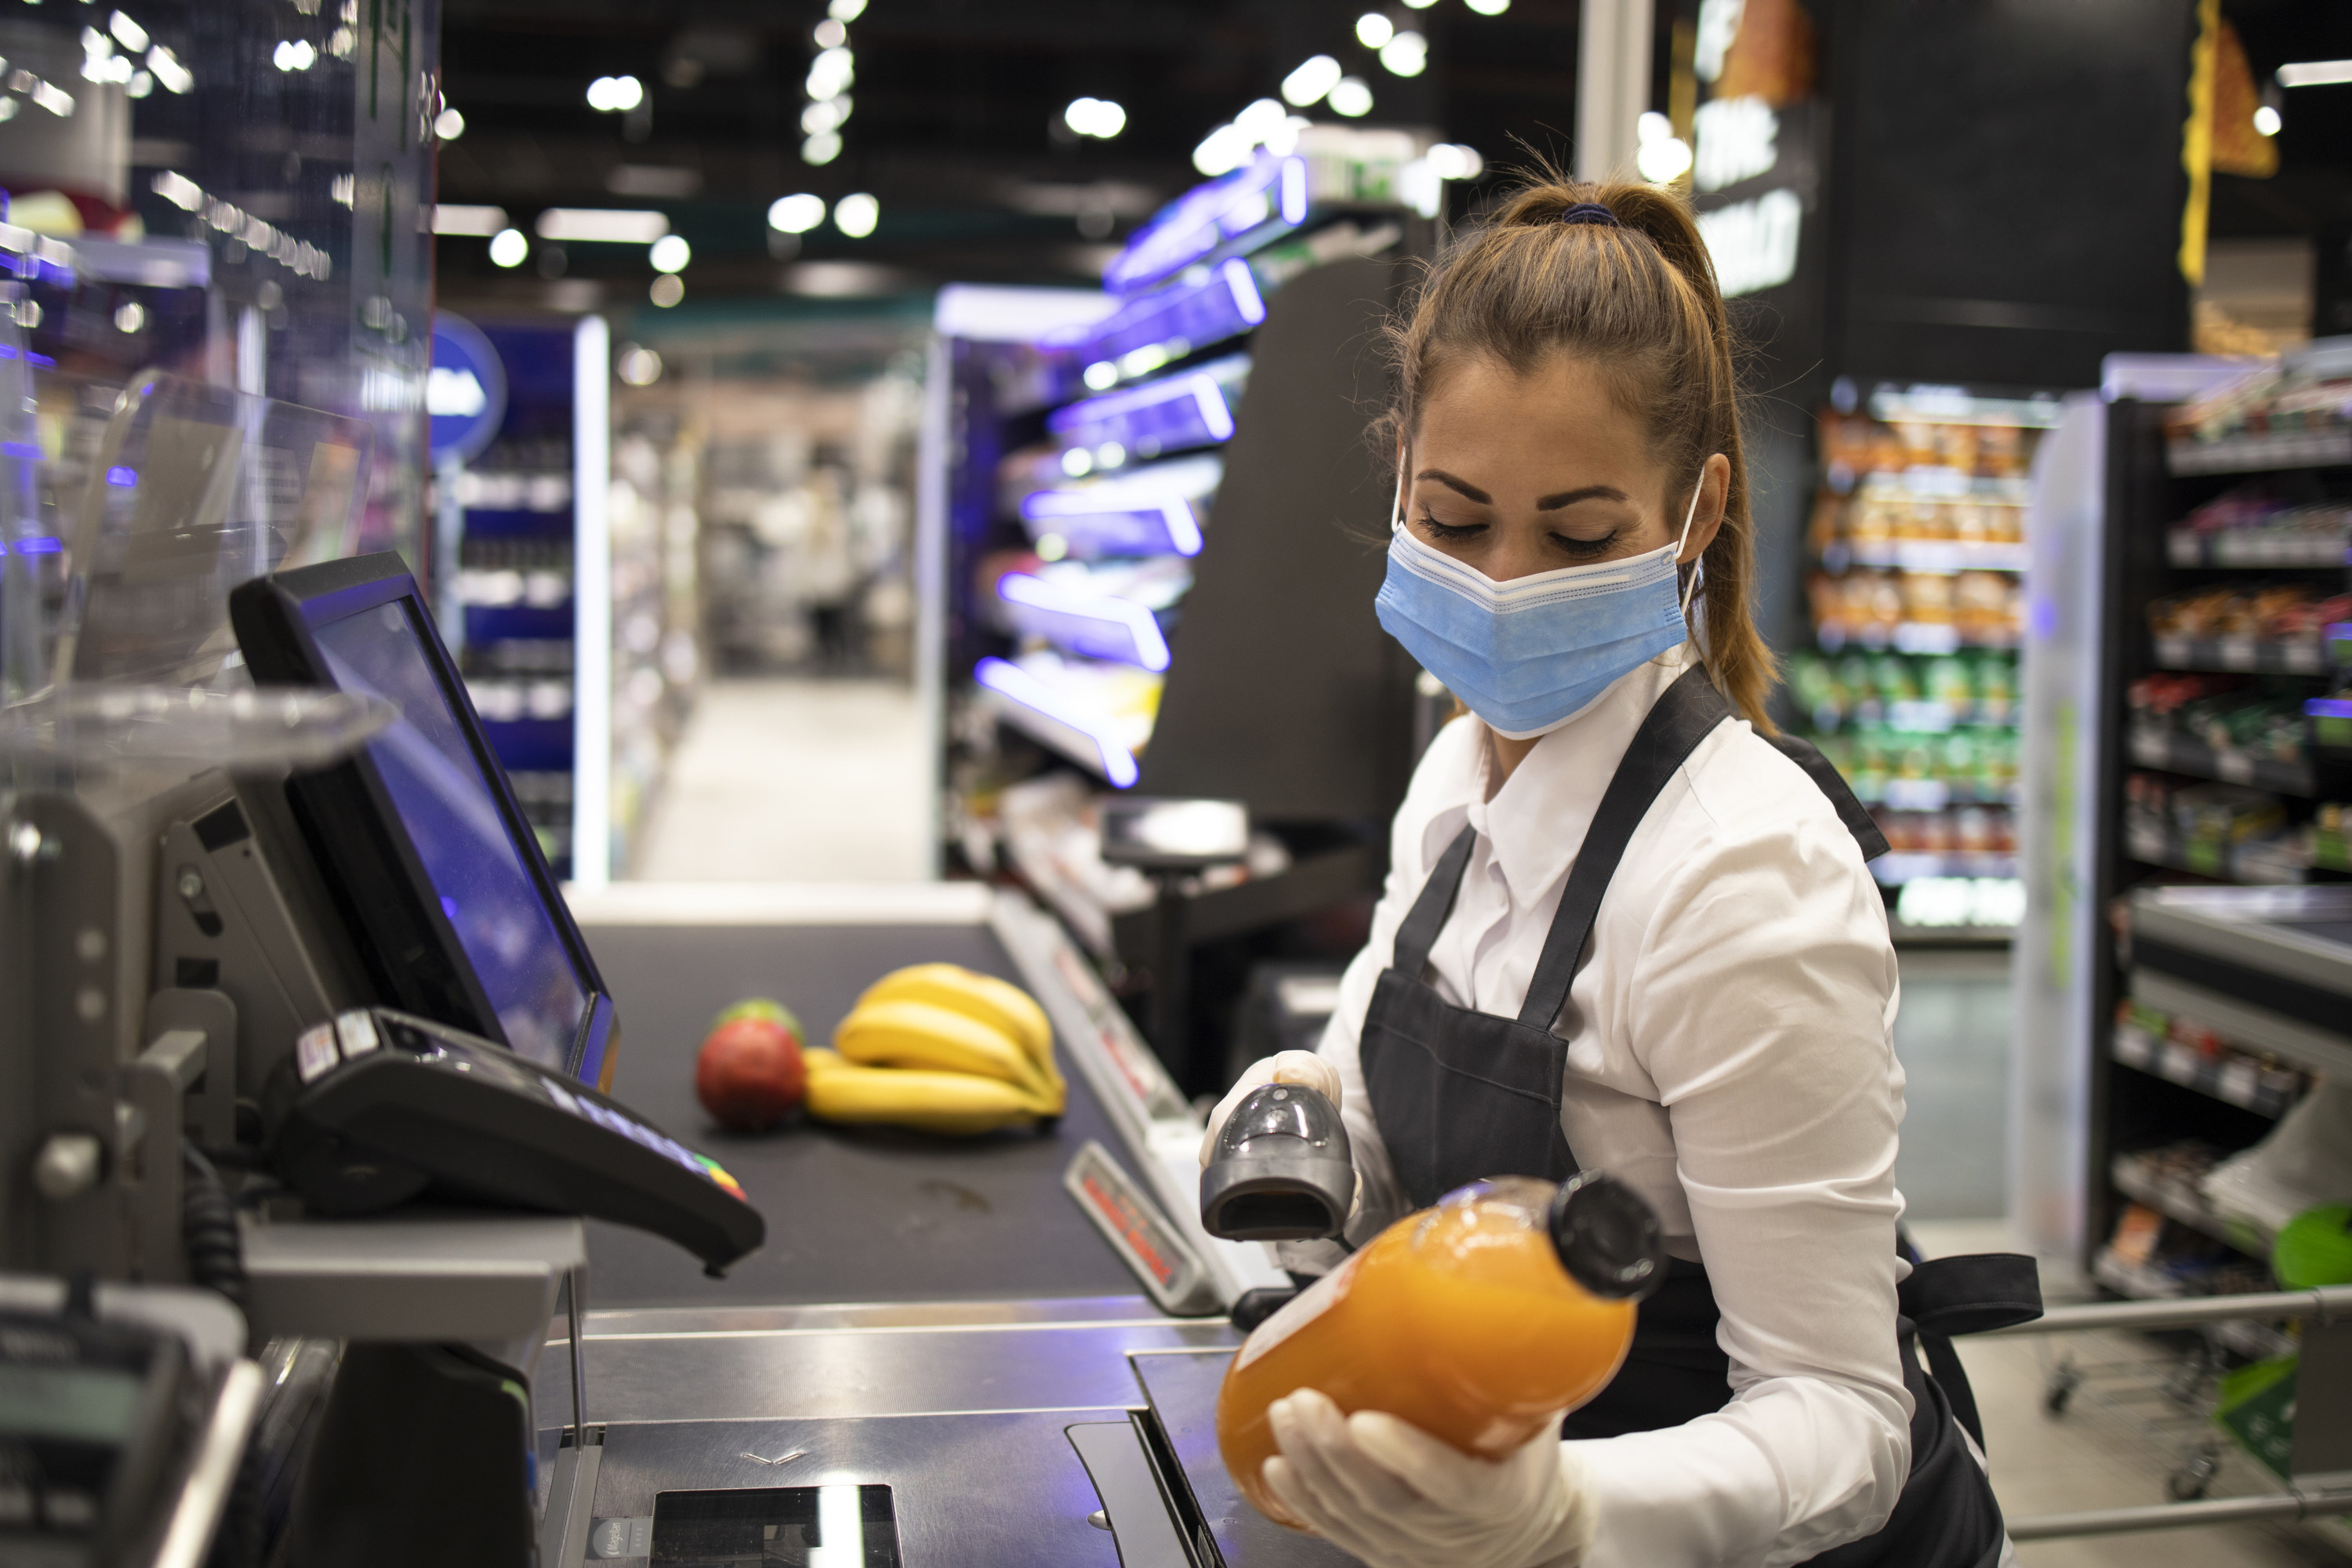 Masked cashier working in a grocery store during the pandemic